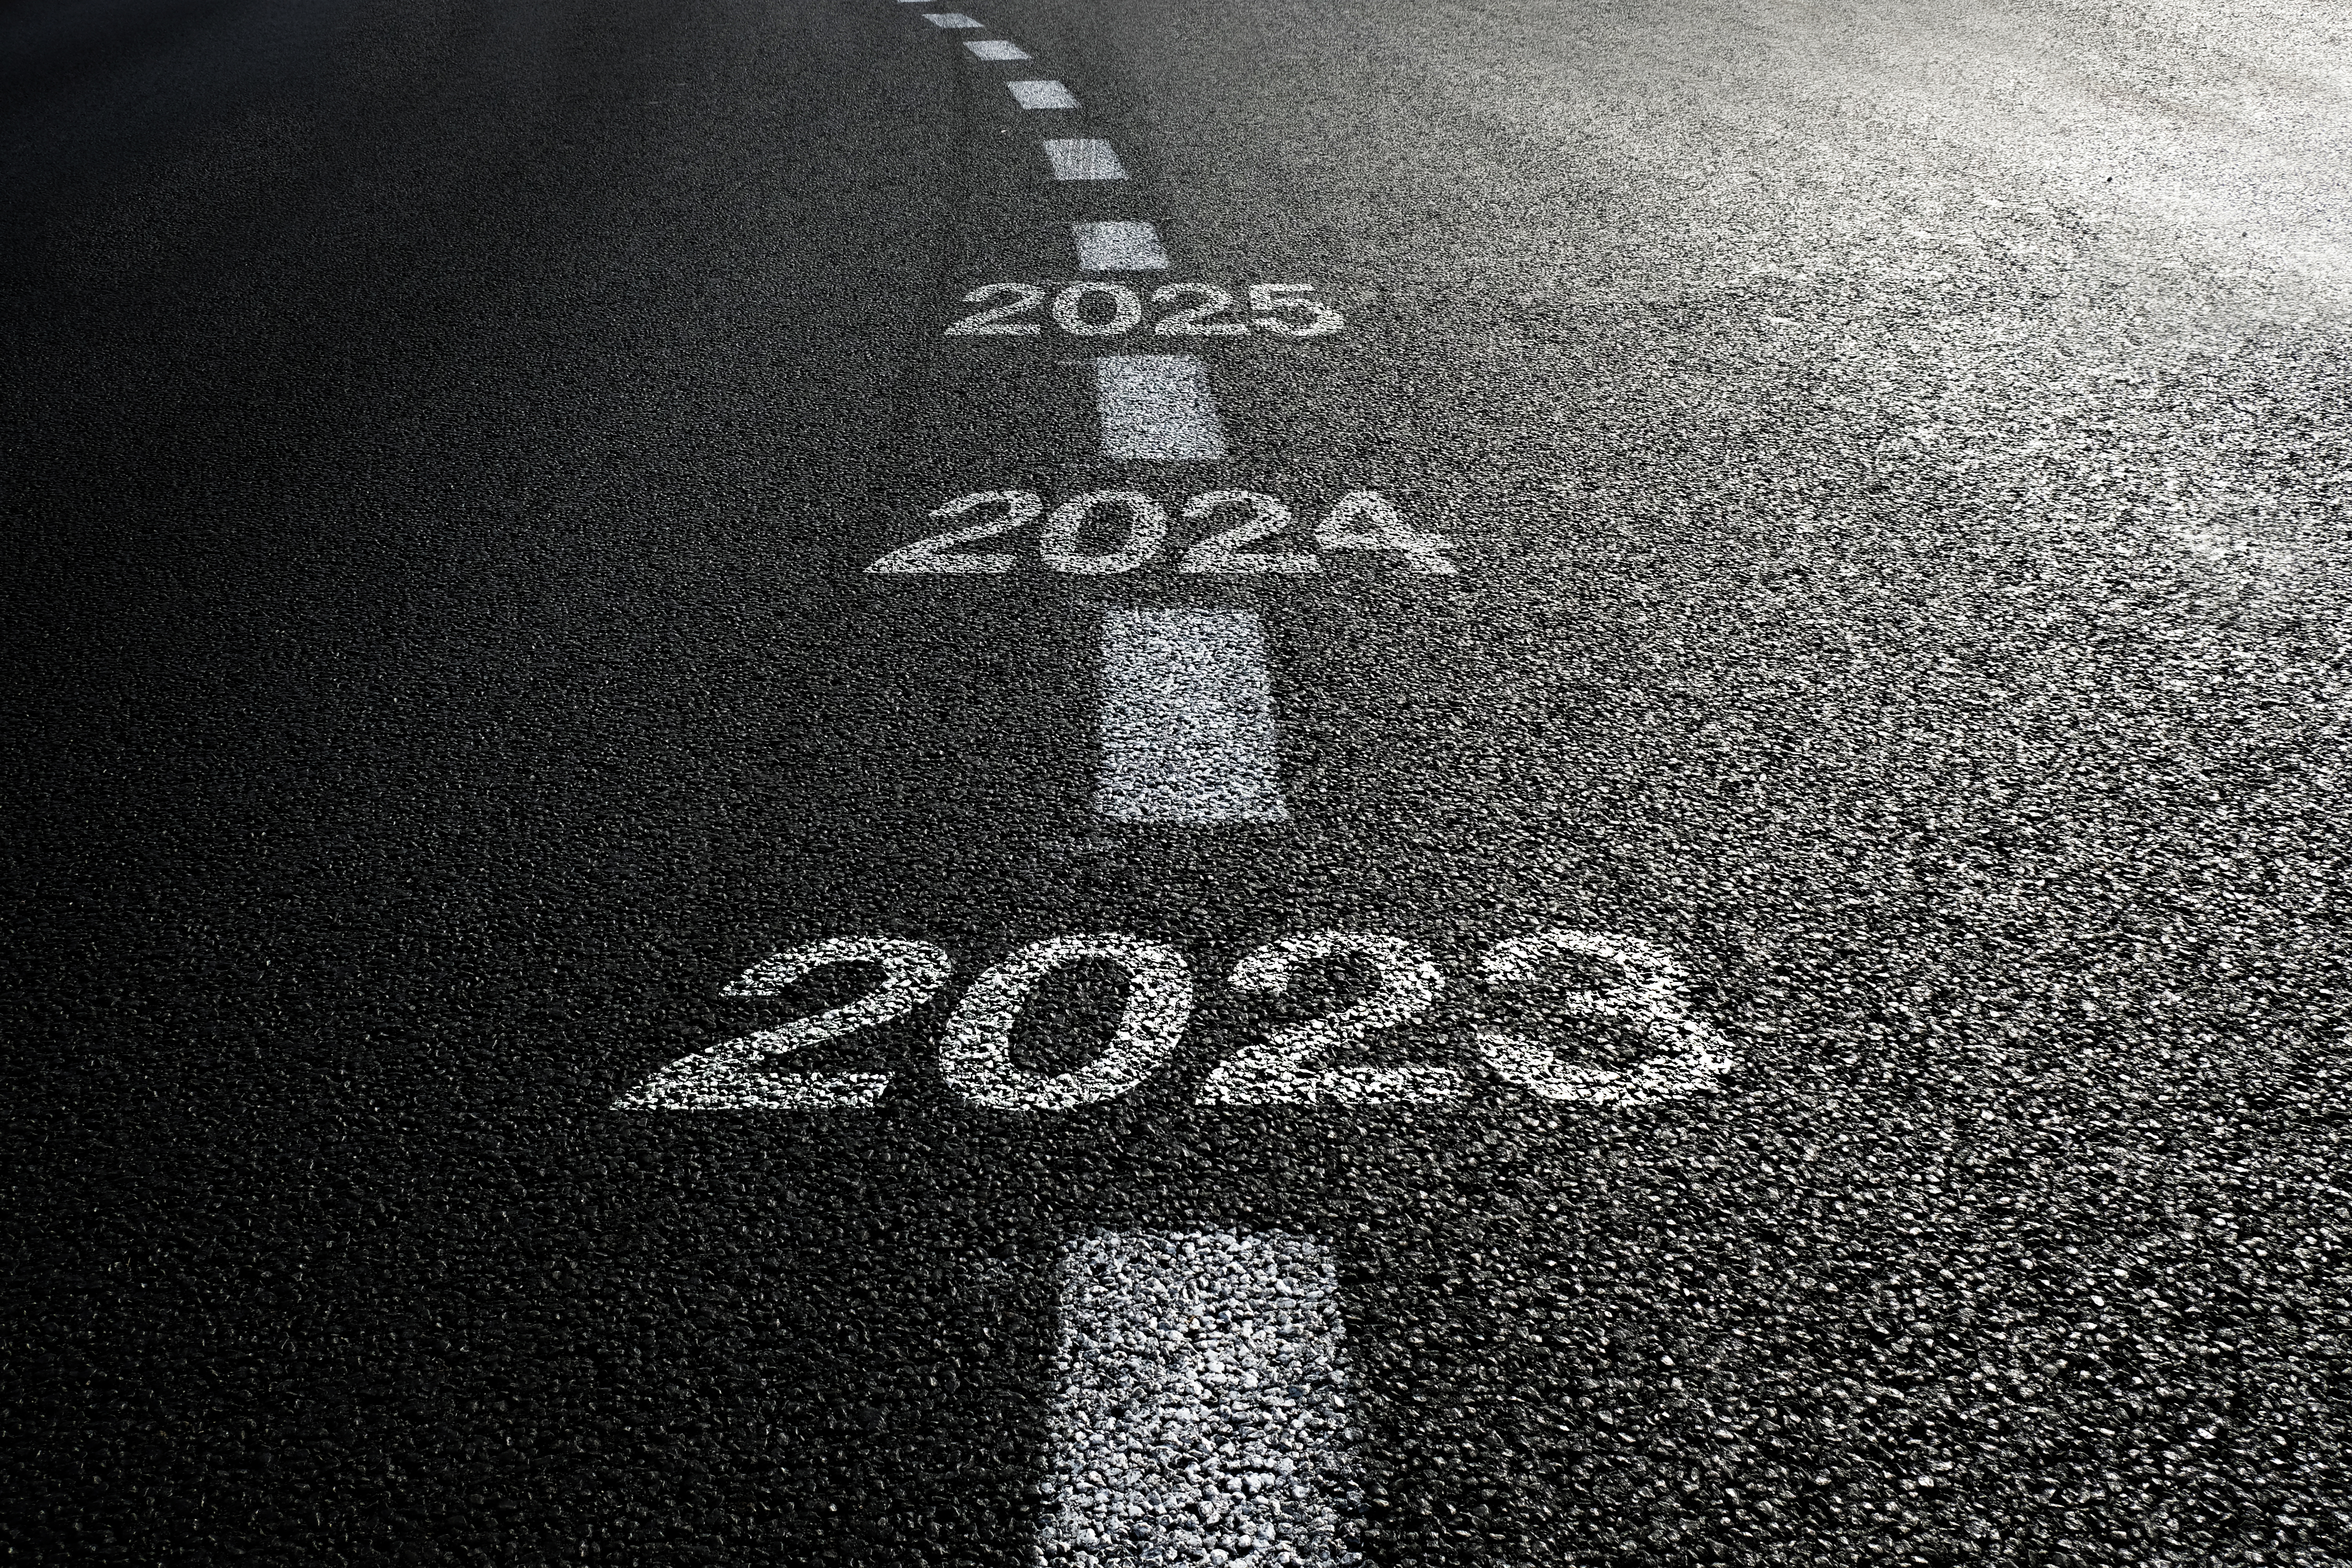 An image of a road with the years 2023, 2024 and 2025 written on the road